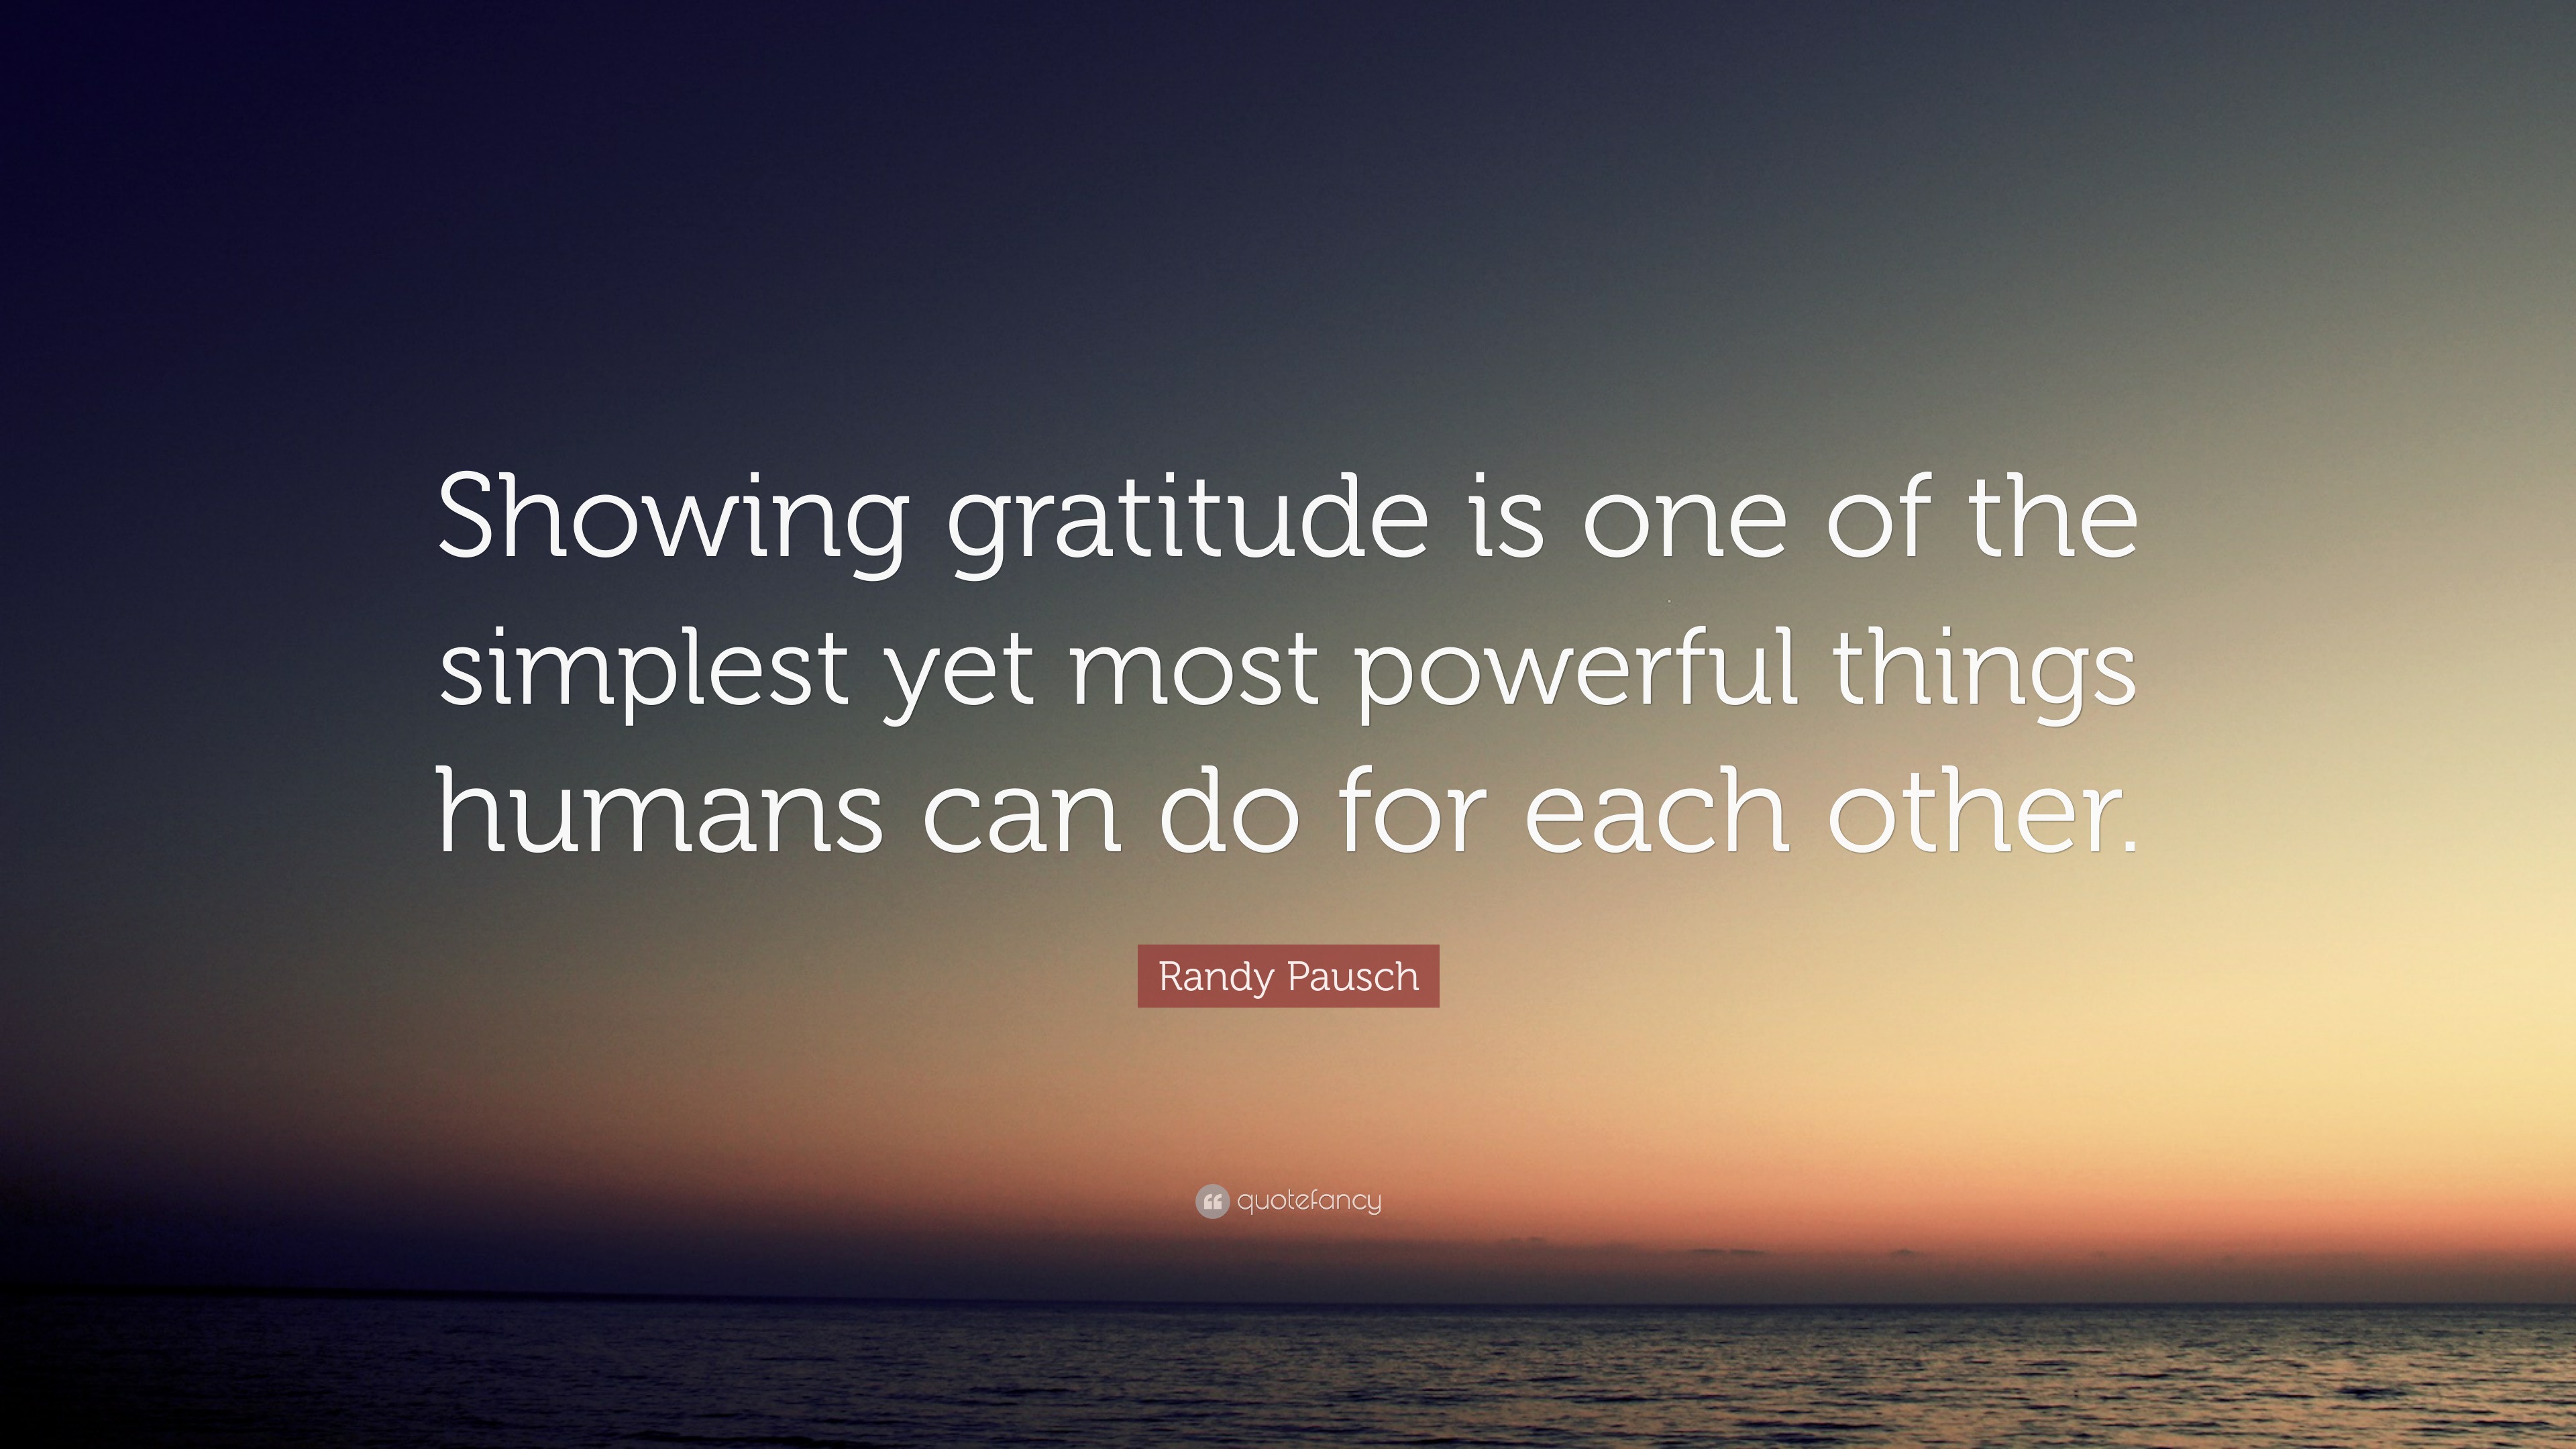 Randy Pausch Quote: “Showing gratitude is one of the simplest yet most